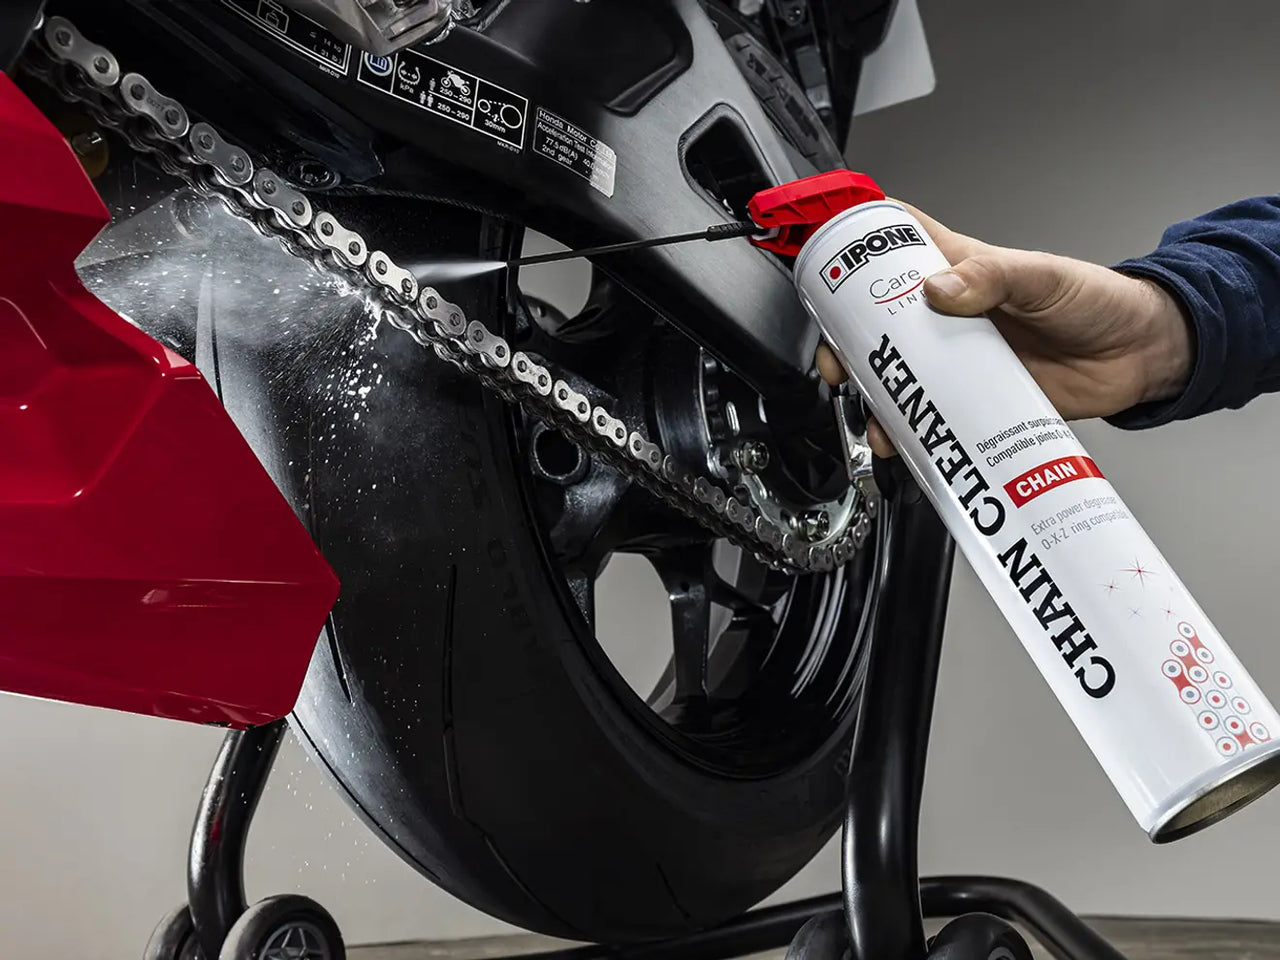 how-to-remove-all-greases-and-dirt-from-motorcycle-chain-Powerful-chain-degreaser-chain-cleaner-price-dubai-uae-best-price-CHAIN CLEANER-cleans-all-types-of-motorcycle-chains-Authorized-Ipone-motorcycle-products